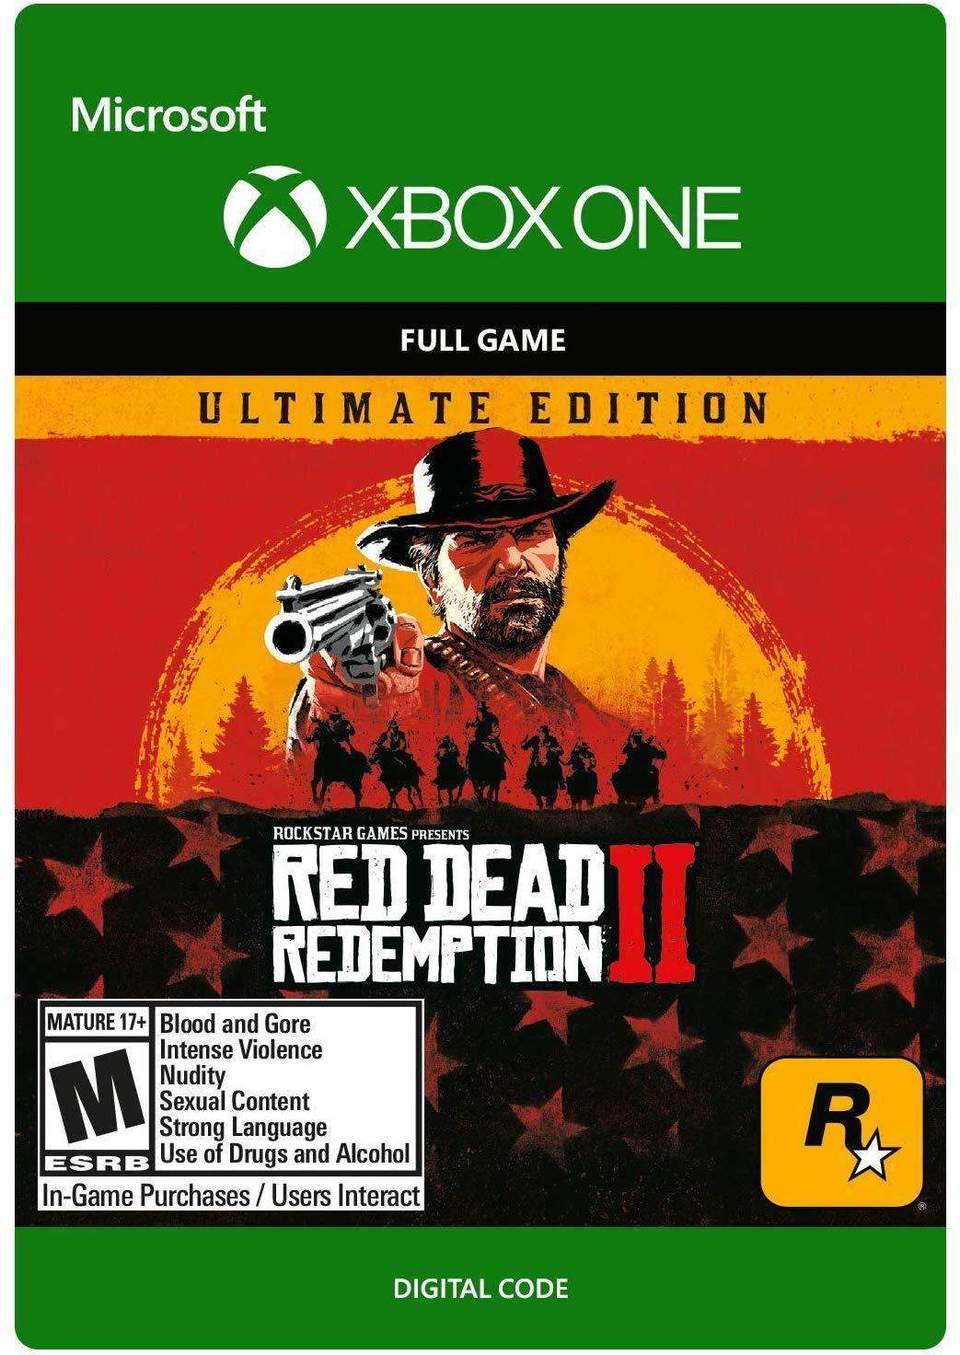 Red Dead Redemption 2: Ultimate Edition (Xbox One Digital Code) + $5 Xbox Digital Gift Card $31.49 via Newegg